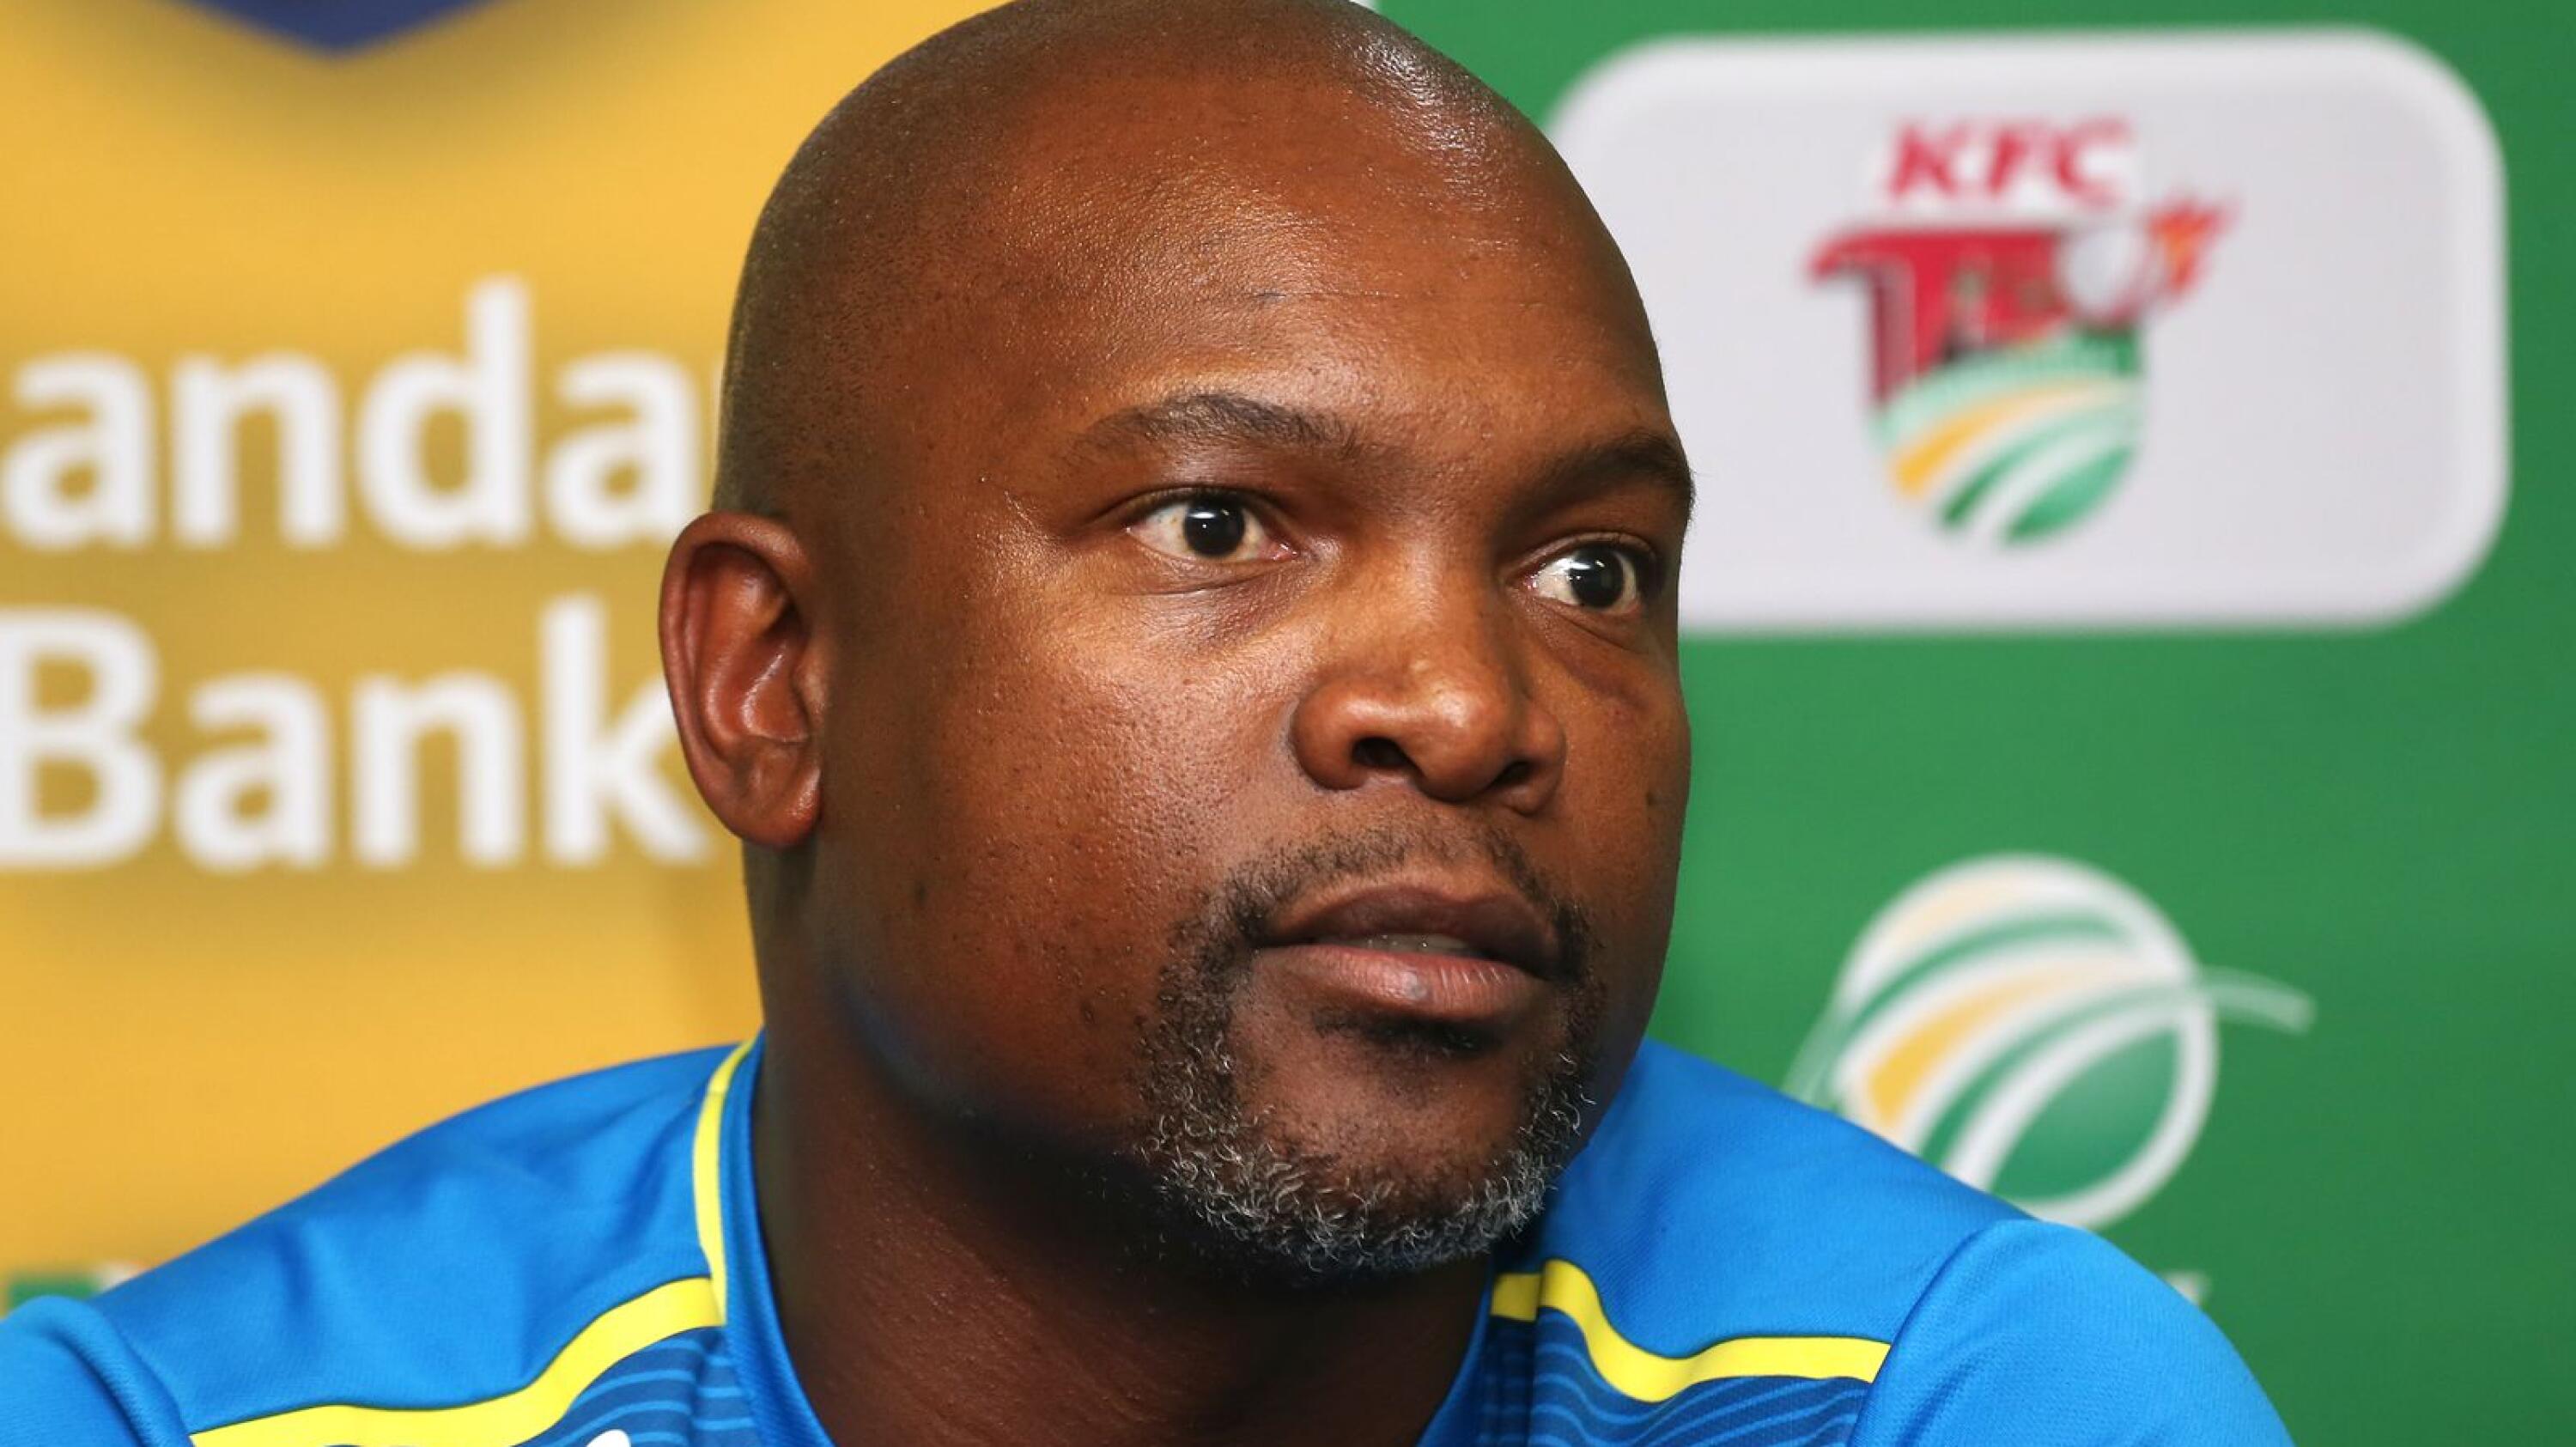 Cricket SA chief executive officer Pholetsi Moseki is hoping new Director of Cricket Enoch Nkwe, pictured, will help the organisation ‘turn the corner’ and reach ‘greater heights’